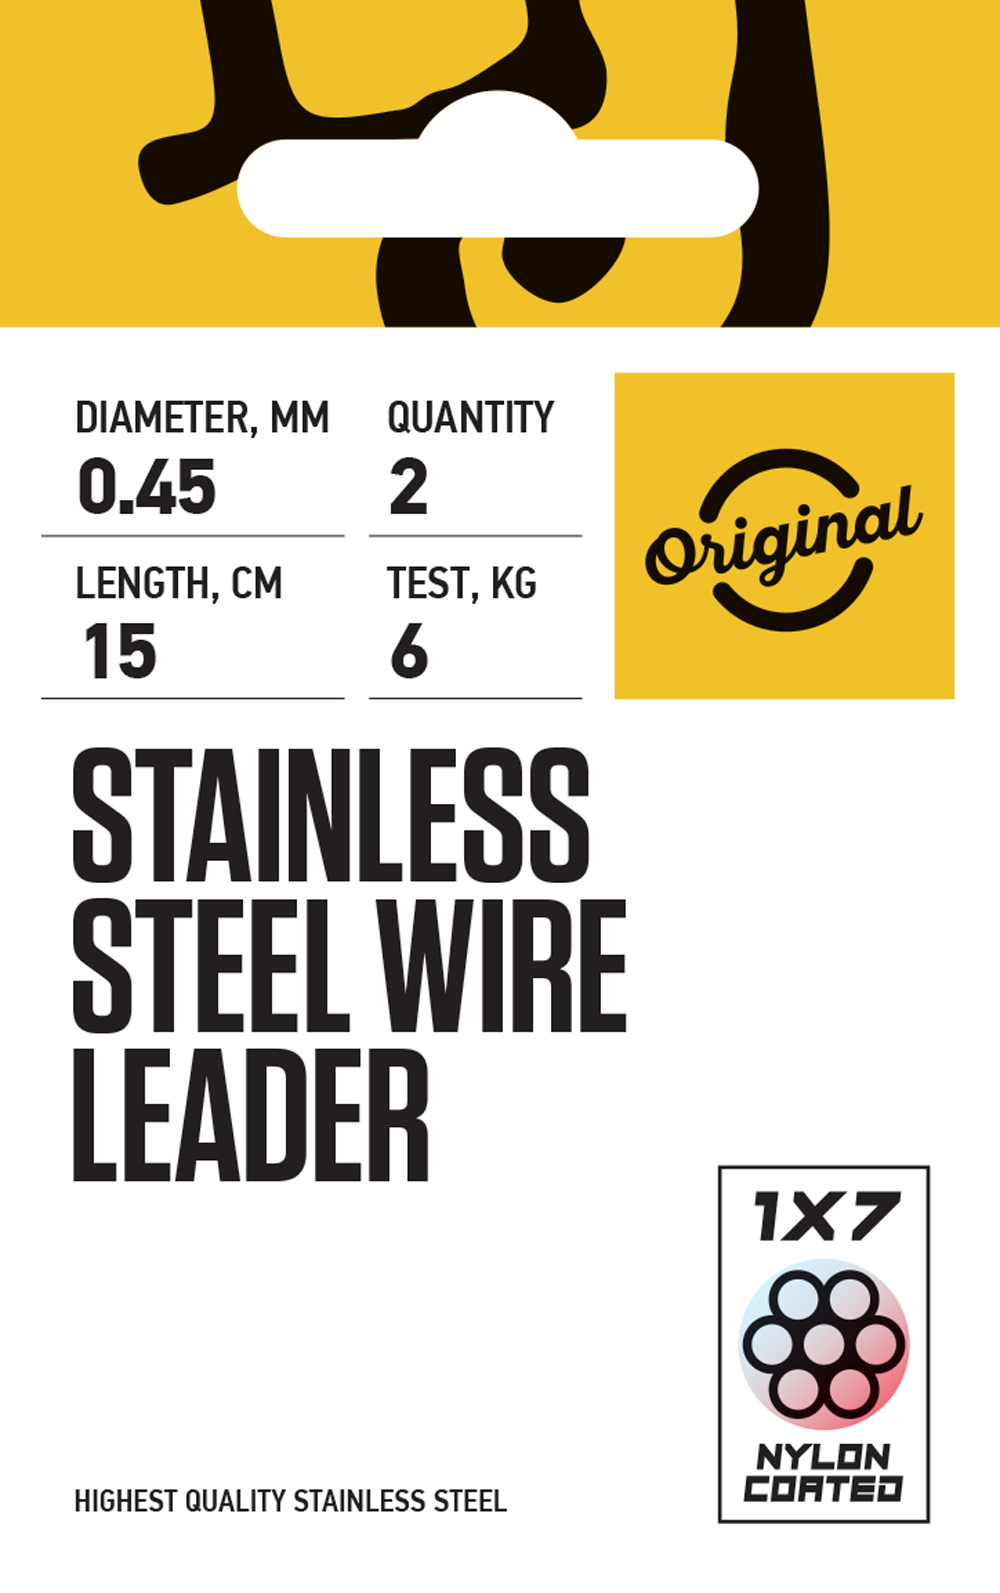 Stainless steel wire leader 1x7 - Lucky John